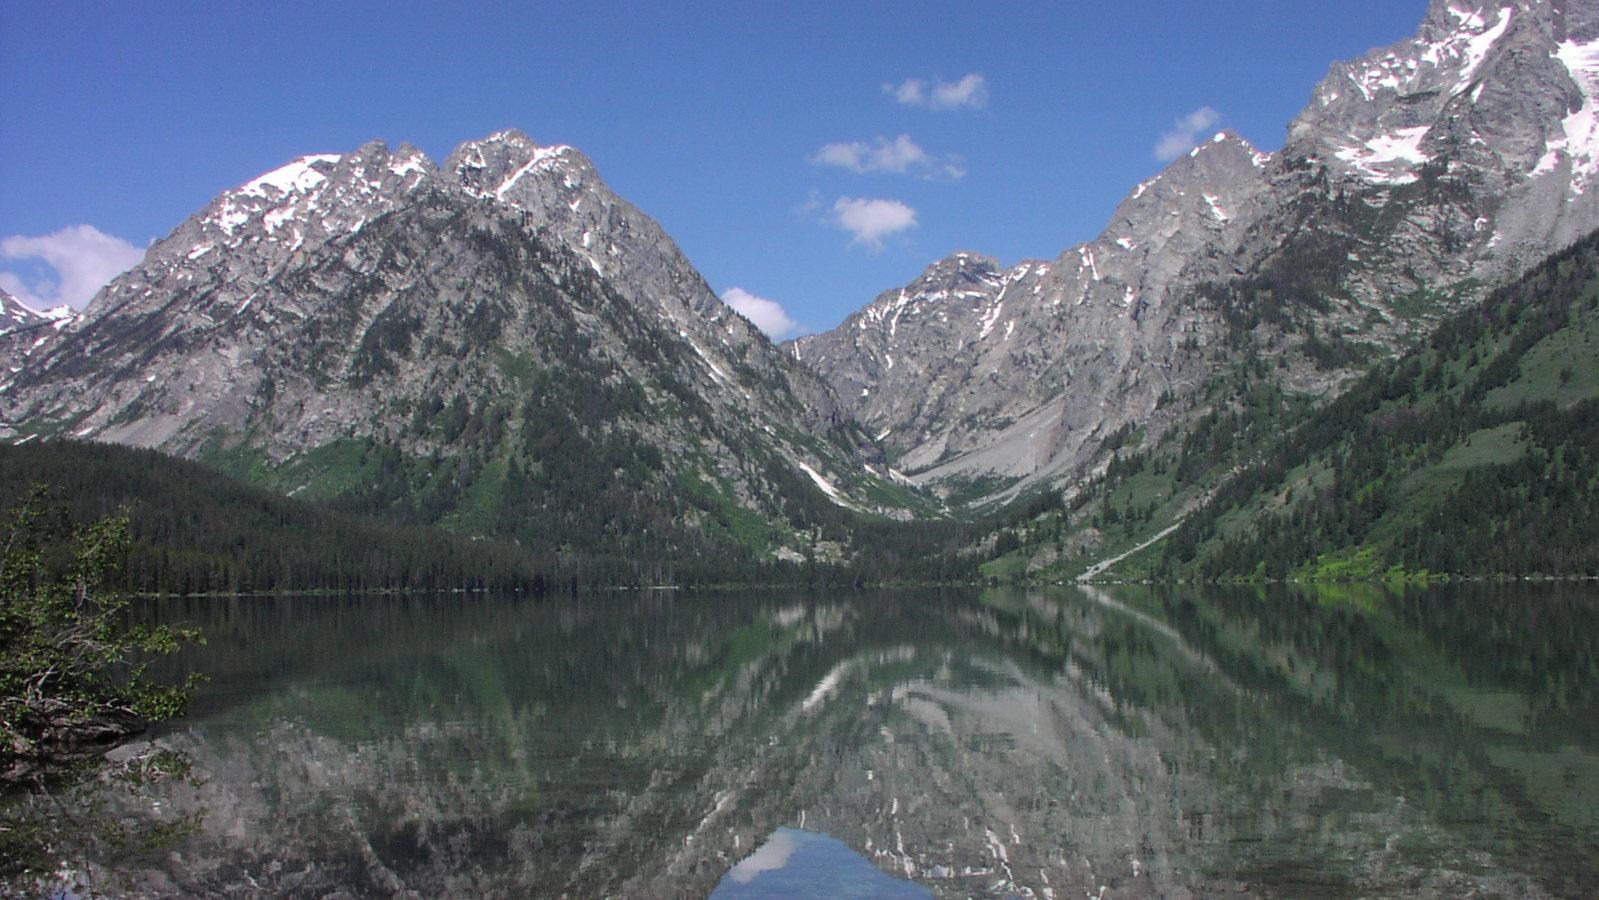 A lake mirrors the scene of mountains soaring to high elevations with a deep blue sky.